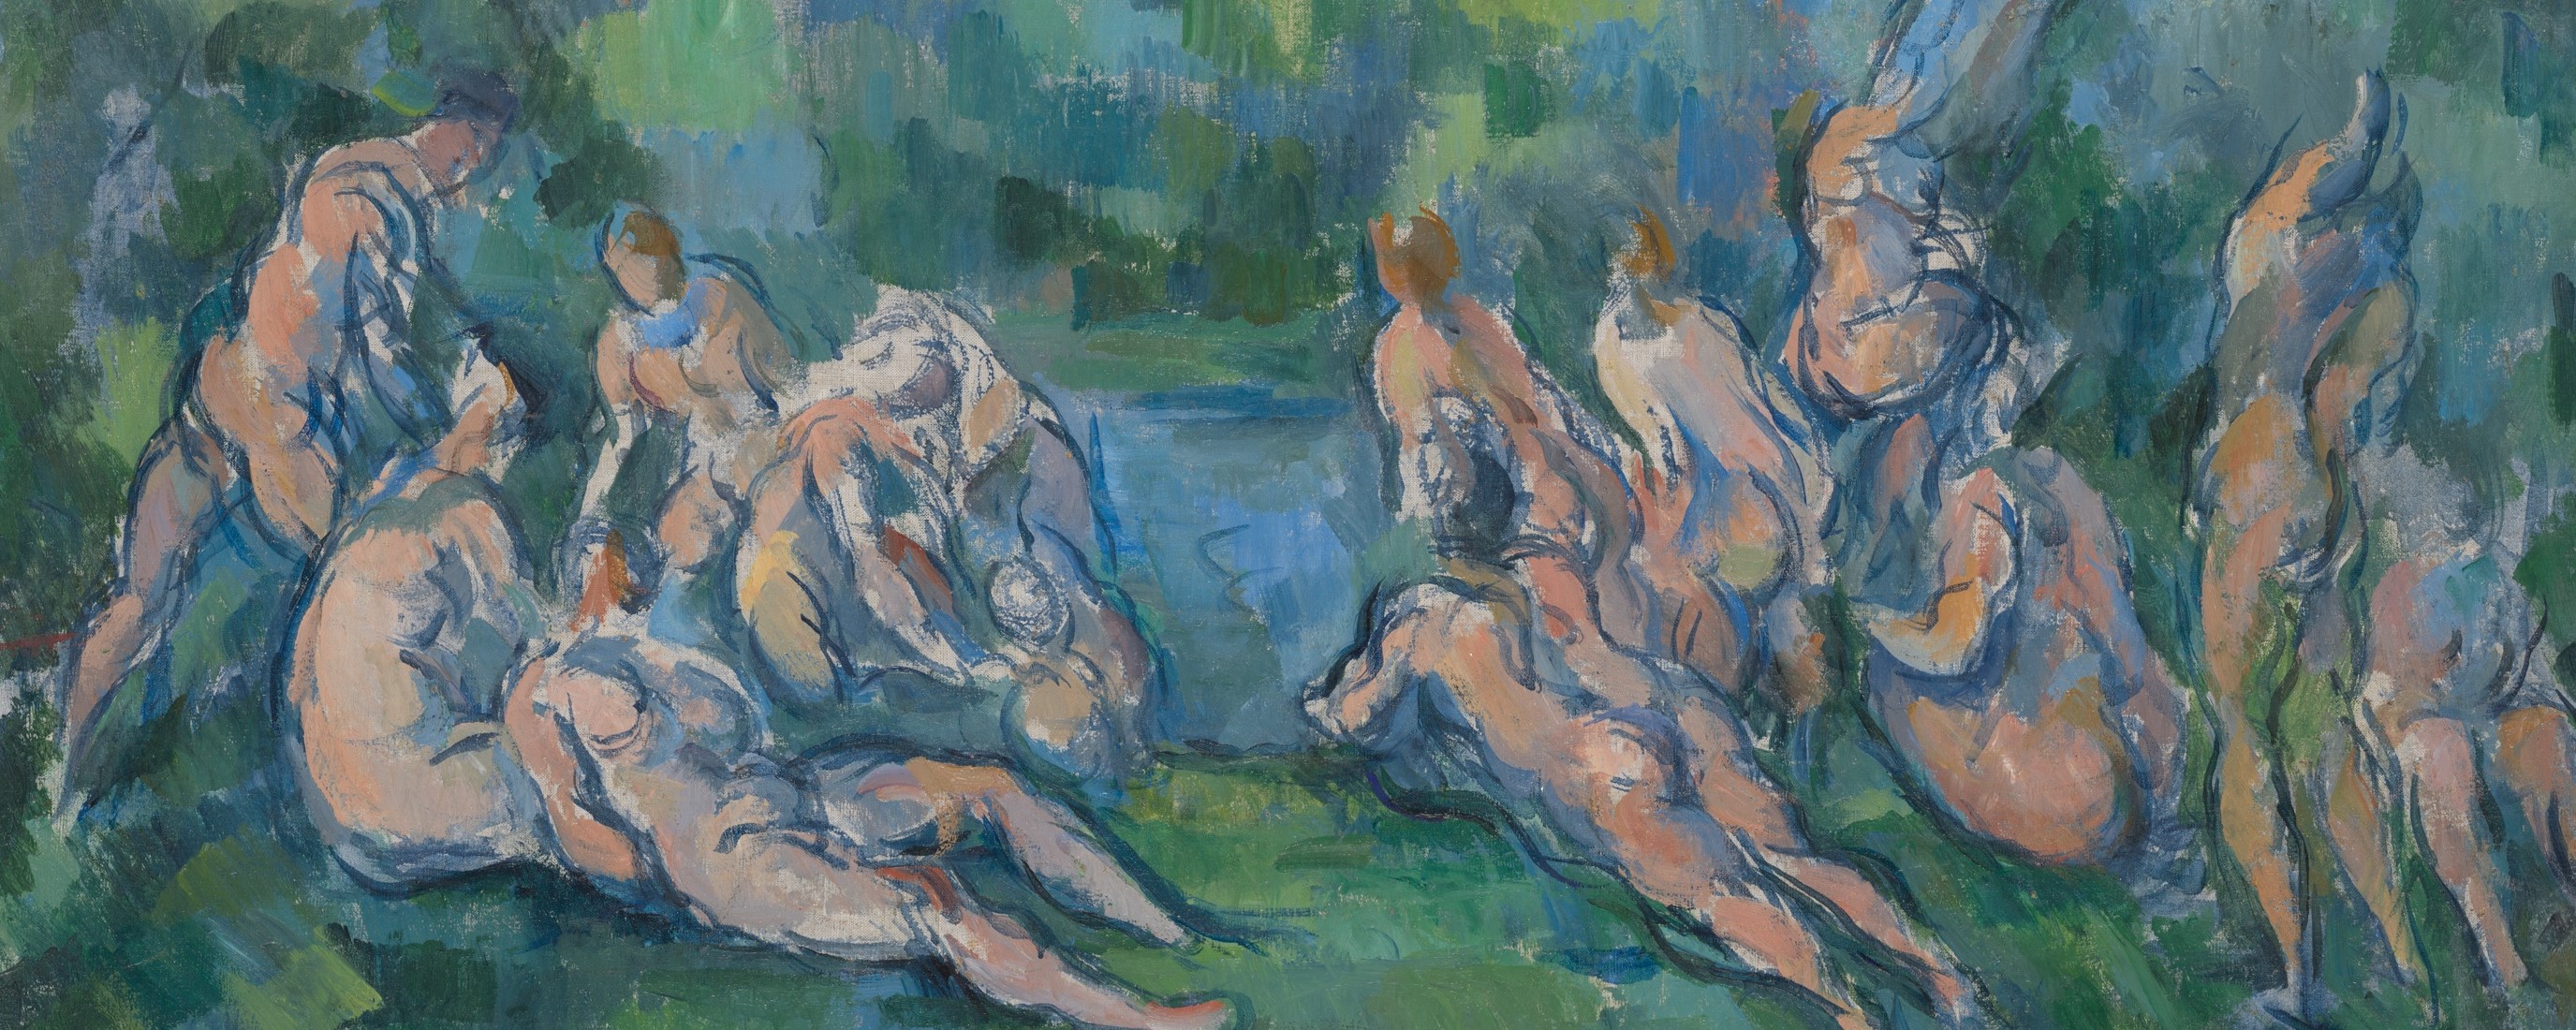 abstract painting of nude figures against a blue and green background